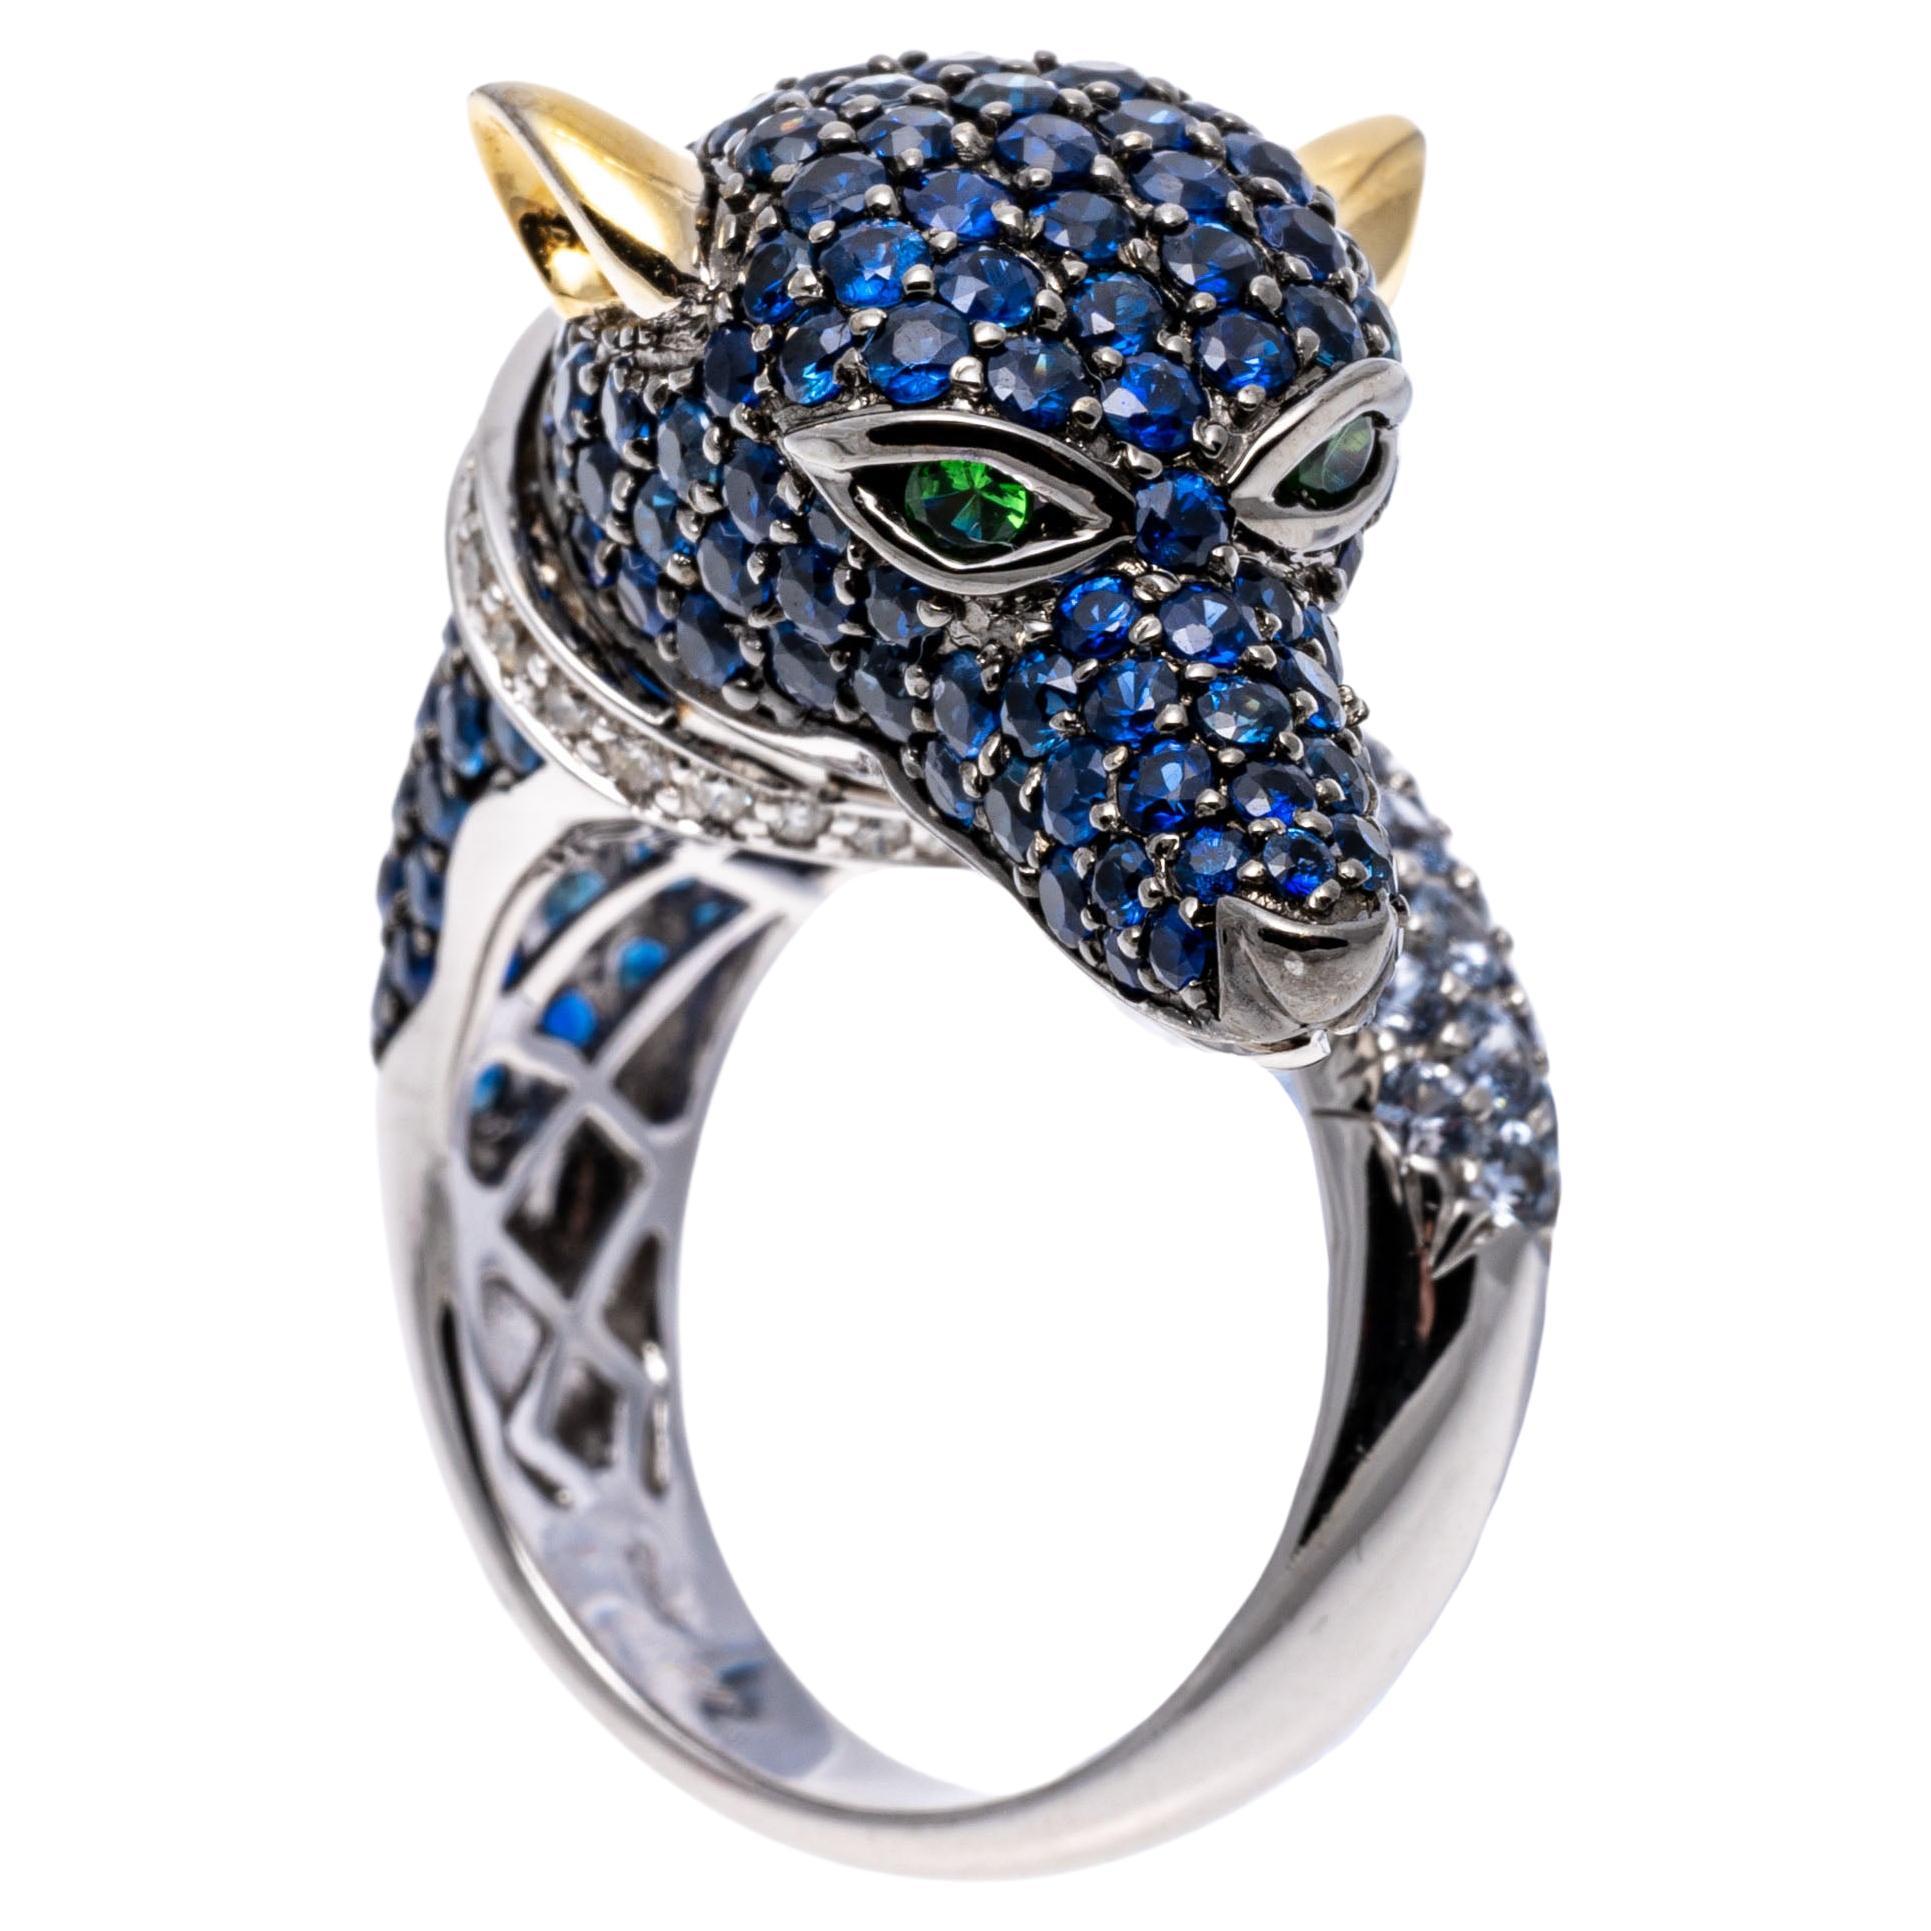 18k White Gold Pave Set Sapphire, Diamond And Tsavorite Dog Ring, Size 7.25 For Sale